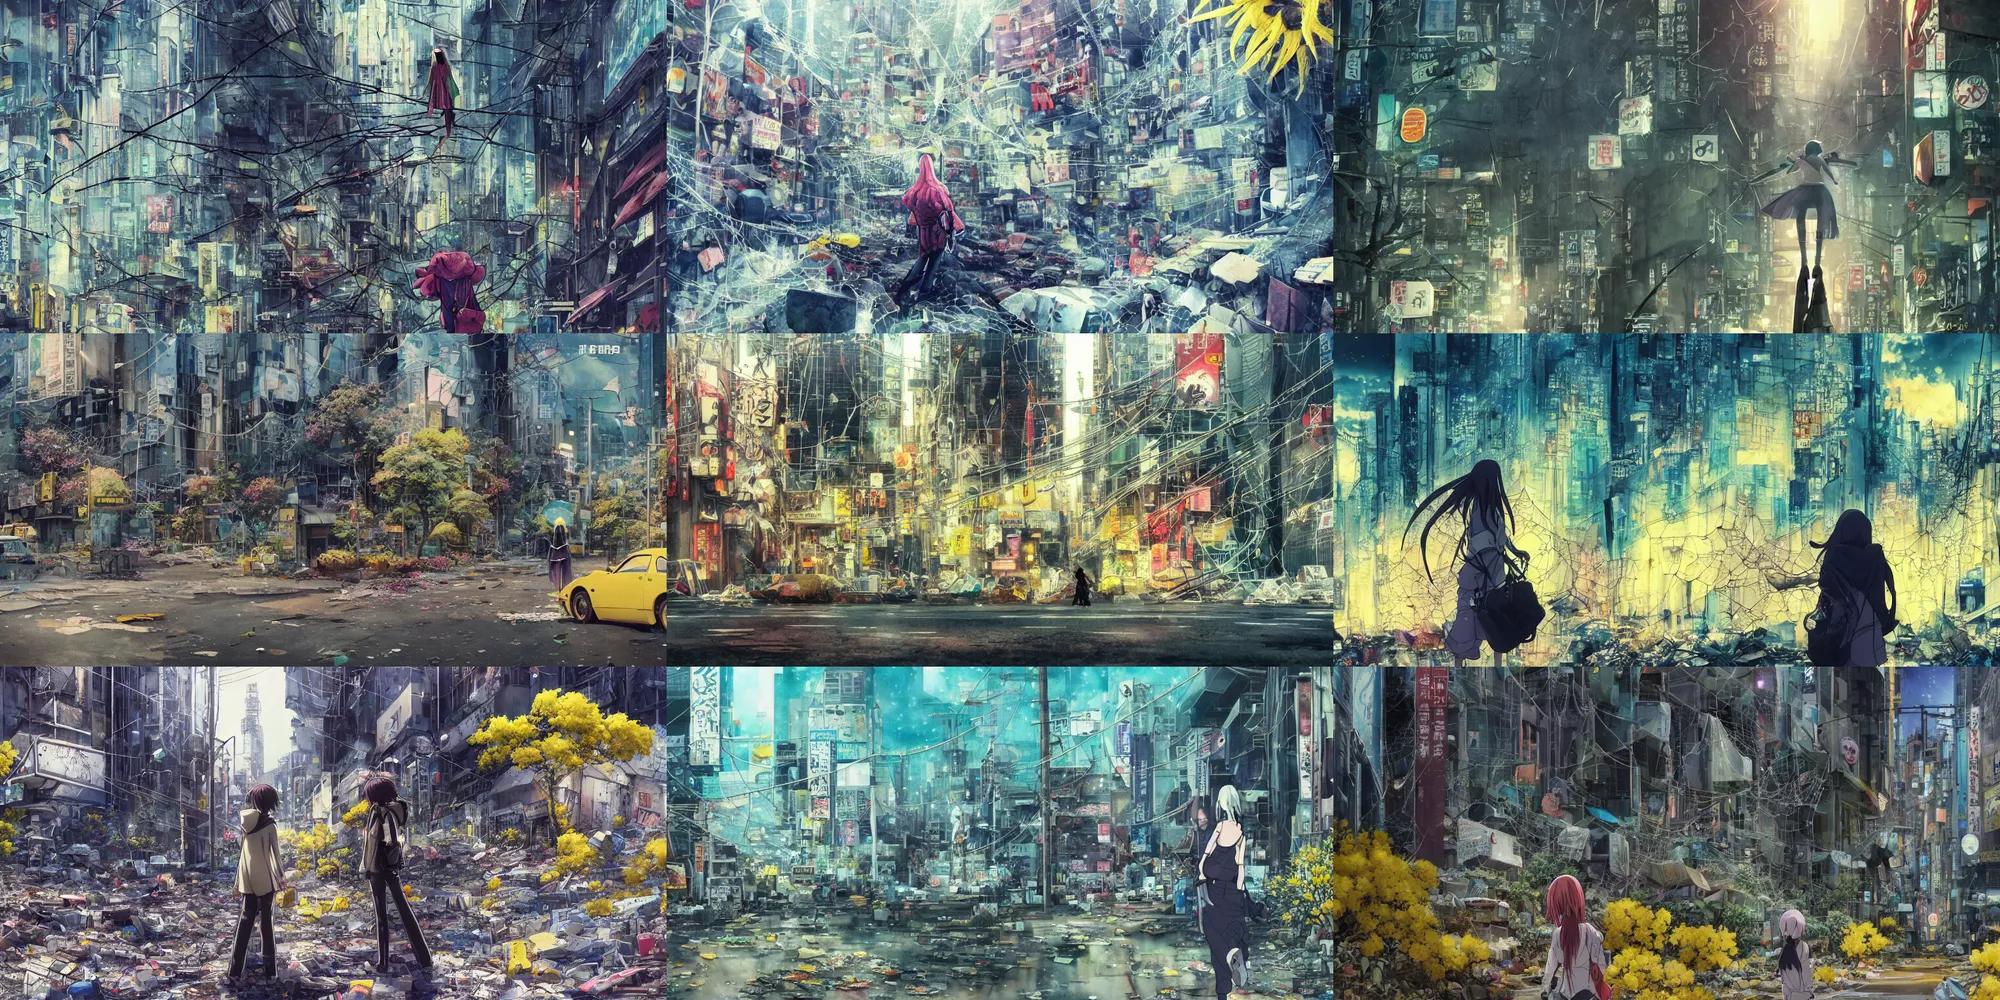 Prompt: incredible anime movie scene, mamoru oshii, otomo, ultra wide, vanishing point, hoody woman explorer, watercolor, empty, spiderwebs, trash, coral reef, daffodils, billboards, bright volumetric bloom lighting, rim light, abandoned city, paper texture, deserted shinjuku junk town, wires, telephone pole, pollen, yellow, red